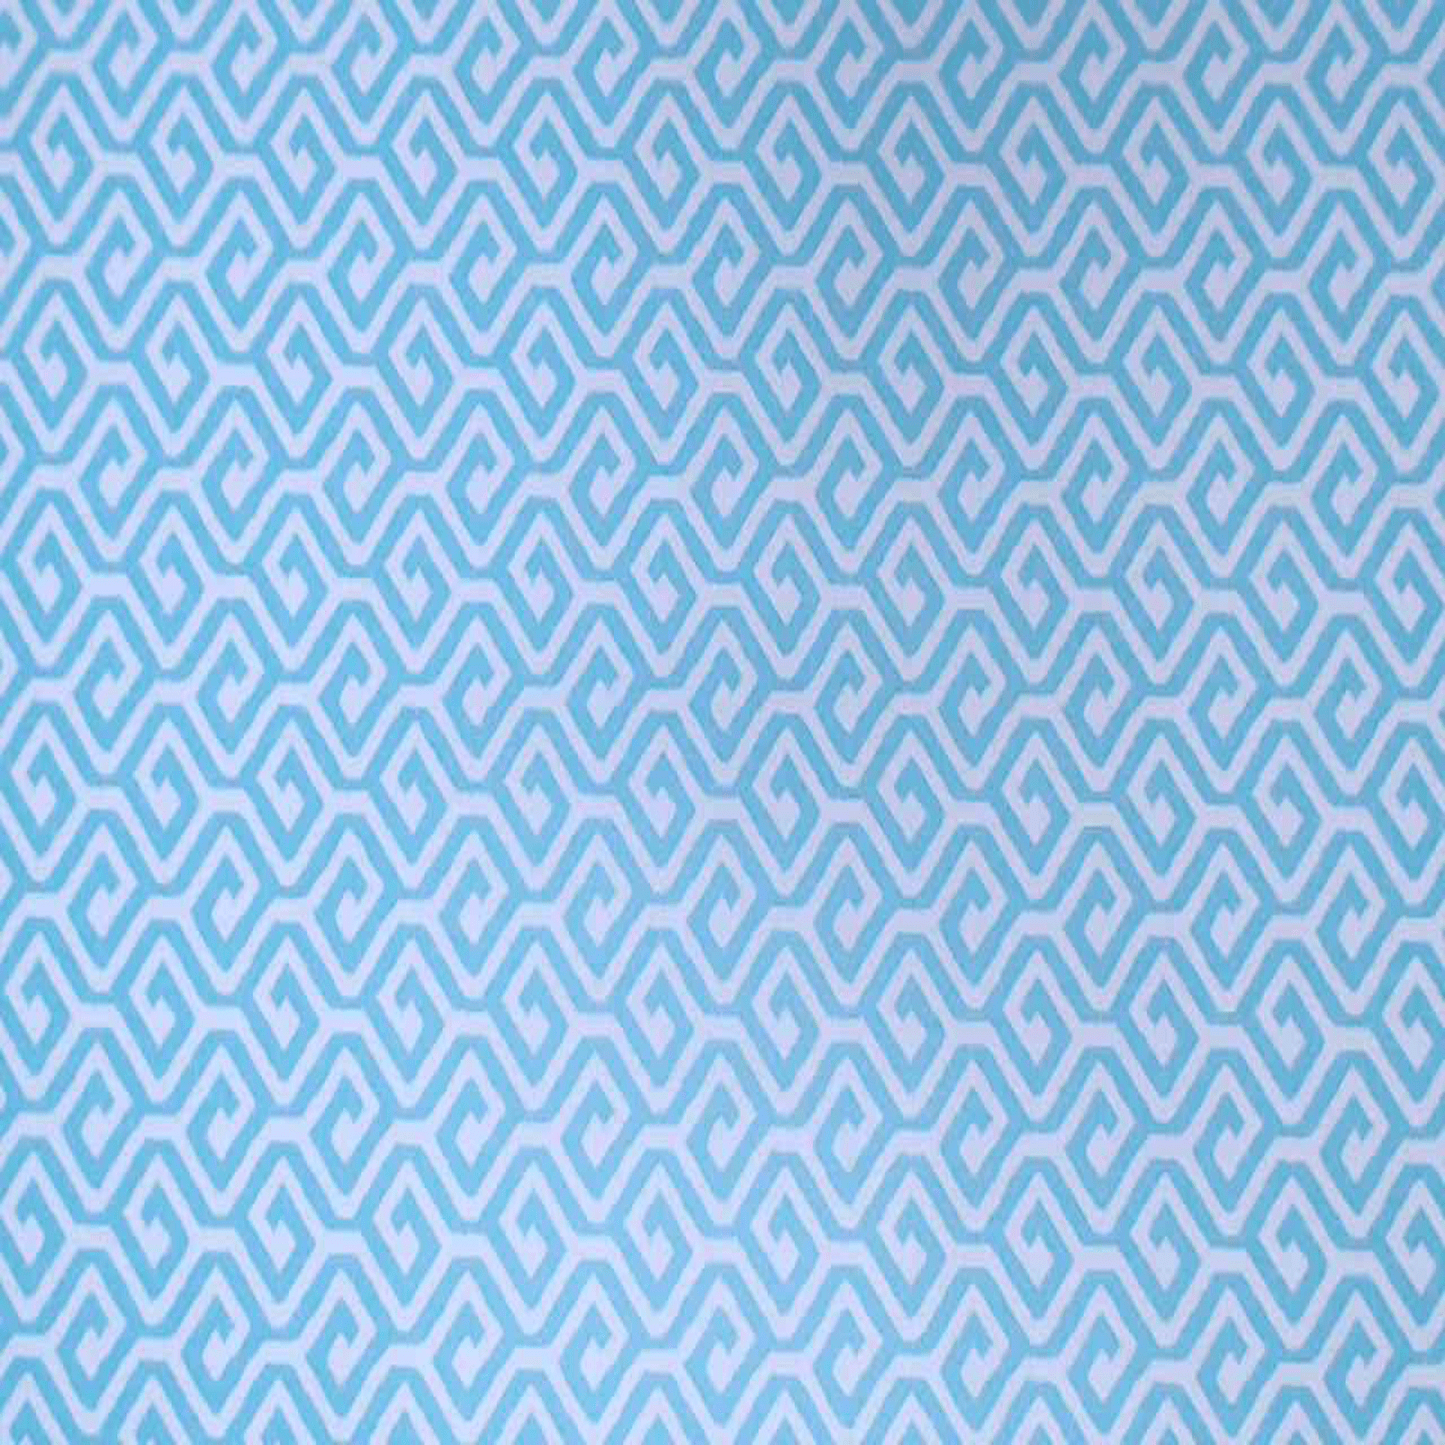 Light Blue Wallpaper Sample Book Sheets, set of 5 for Junk Journals, Mixed Media and Collage Art Projects